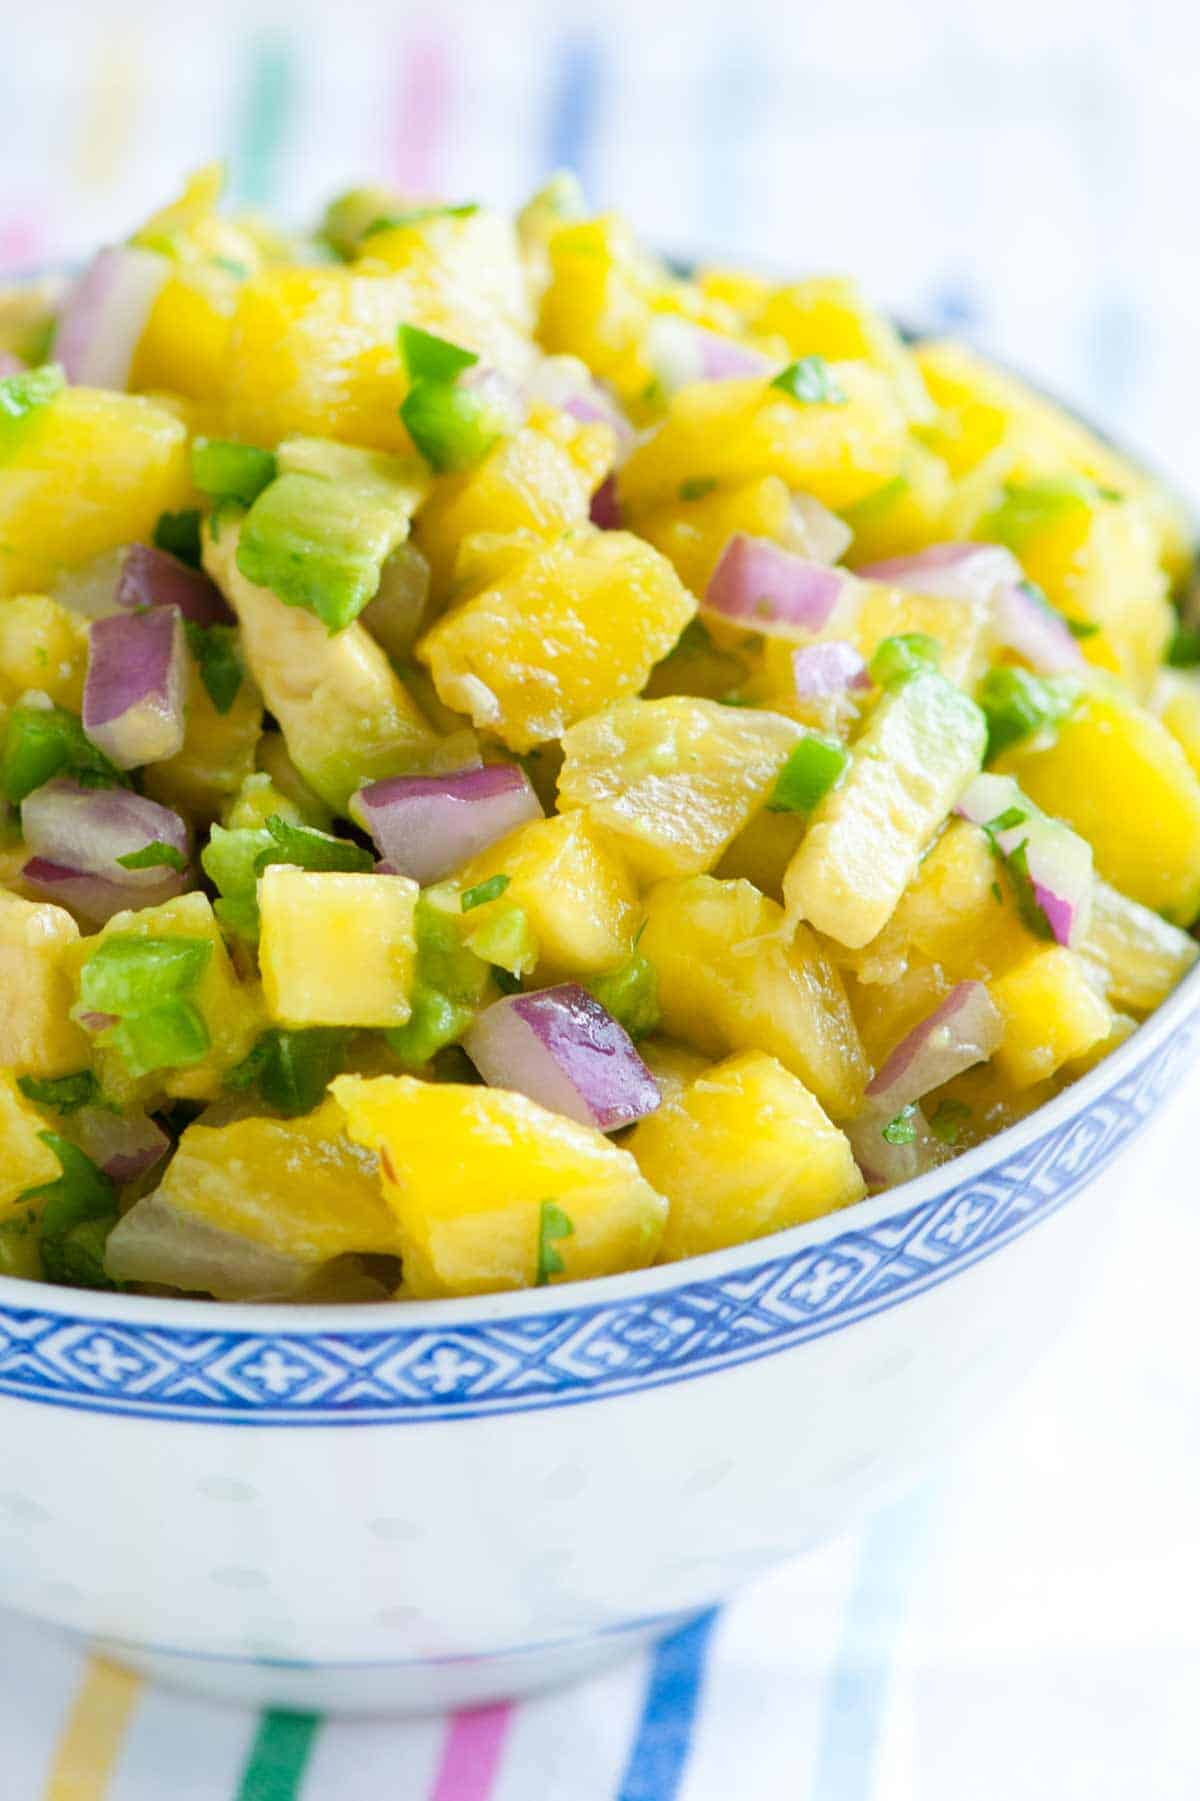 Spicy Avocado and Pineapple Salsa